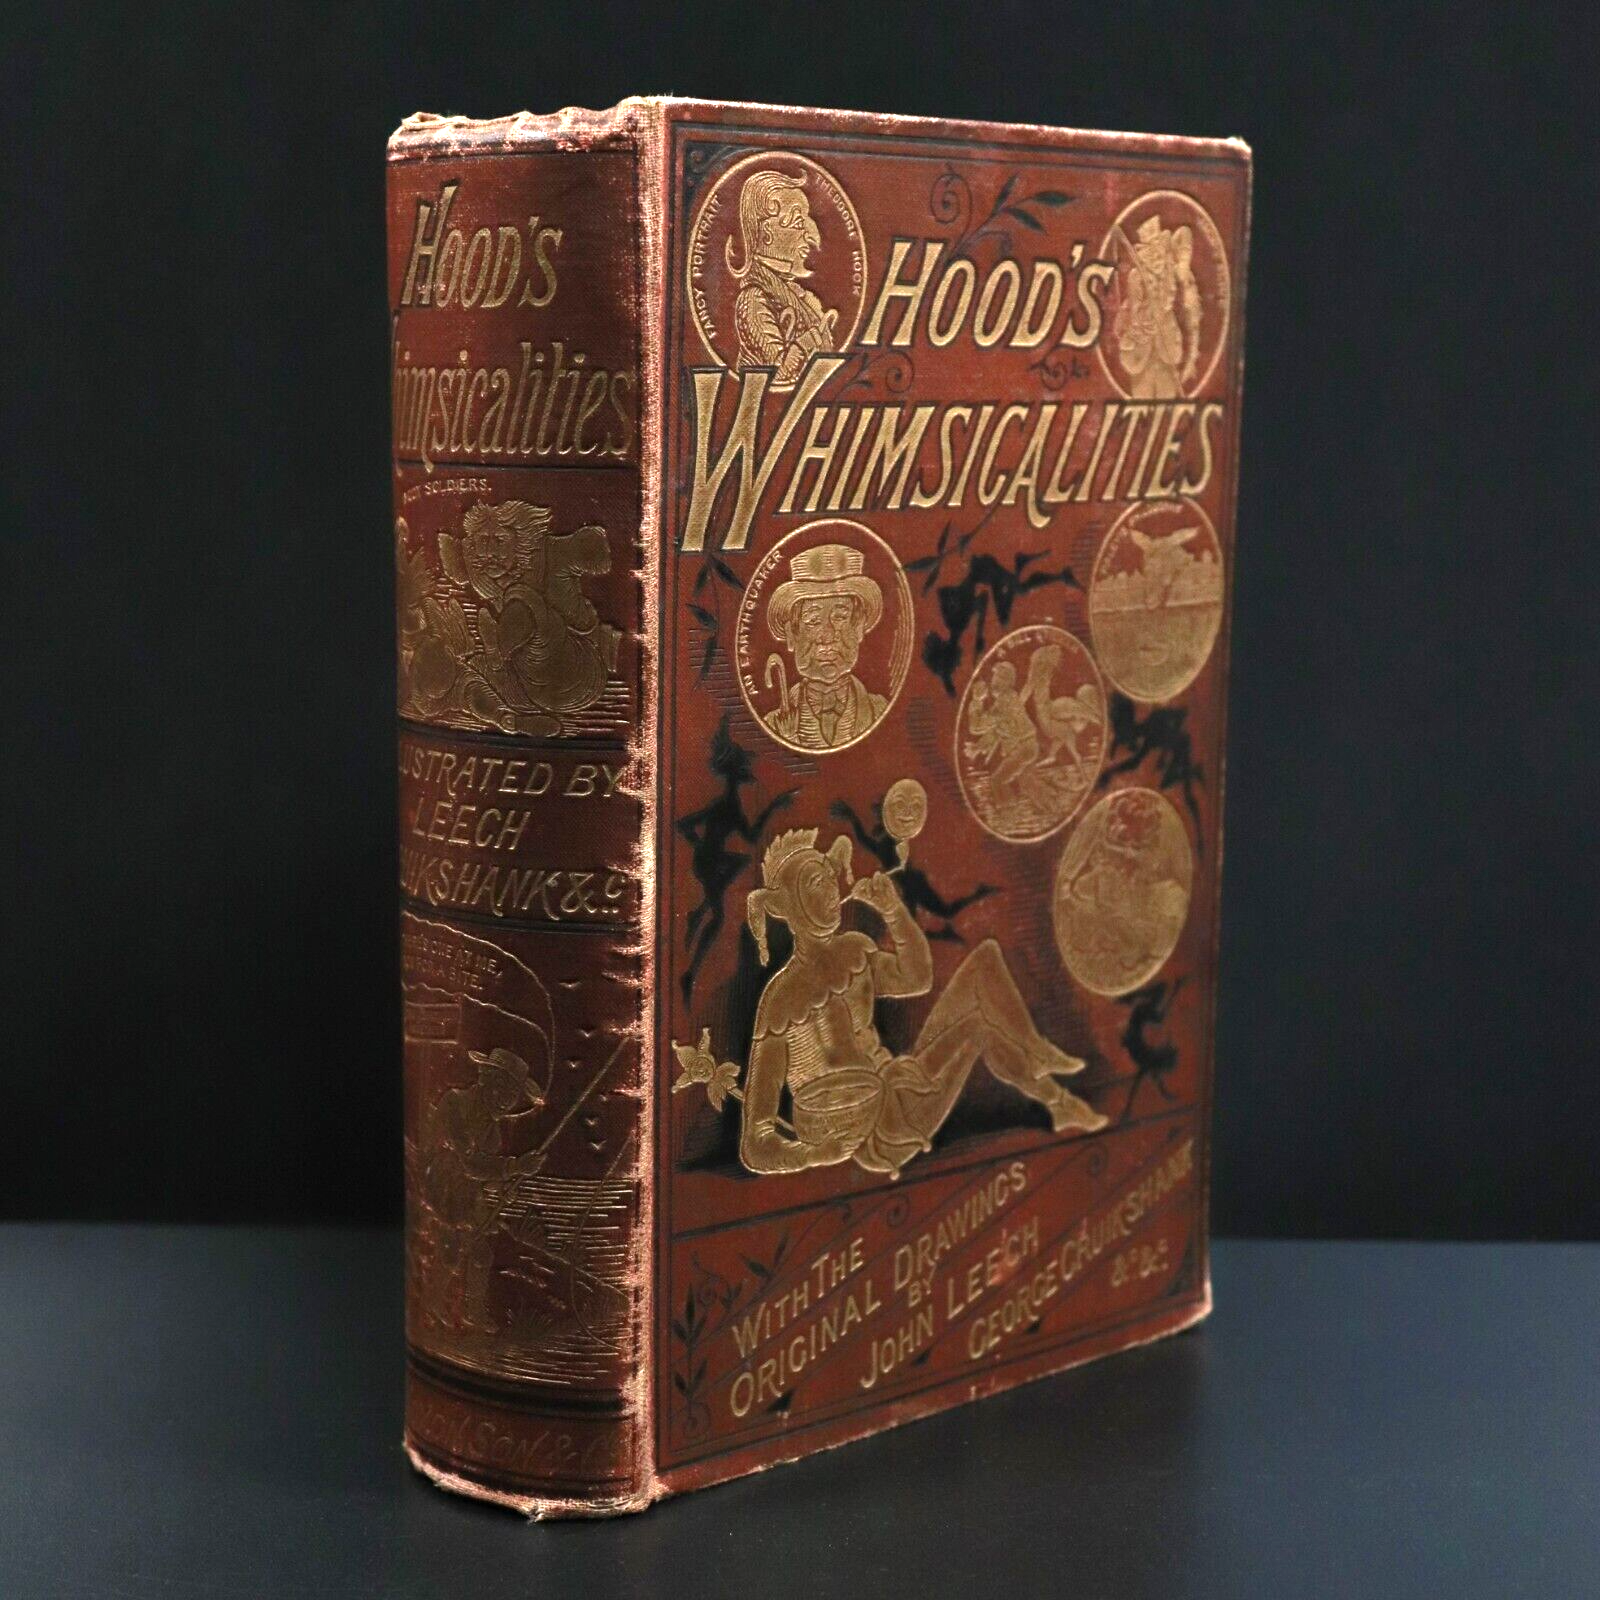 c1880 Whimsicalities by Thomas Hood Antique Illustrated British Literature Book